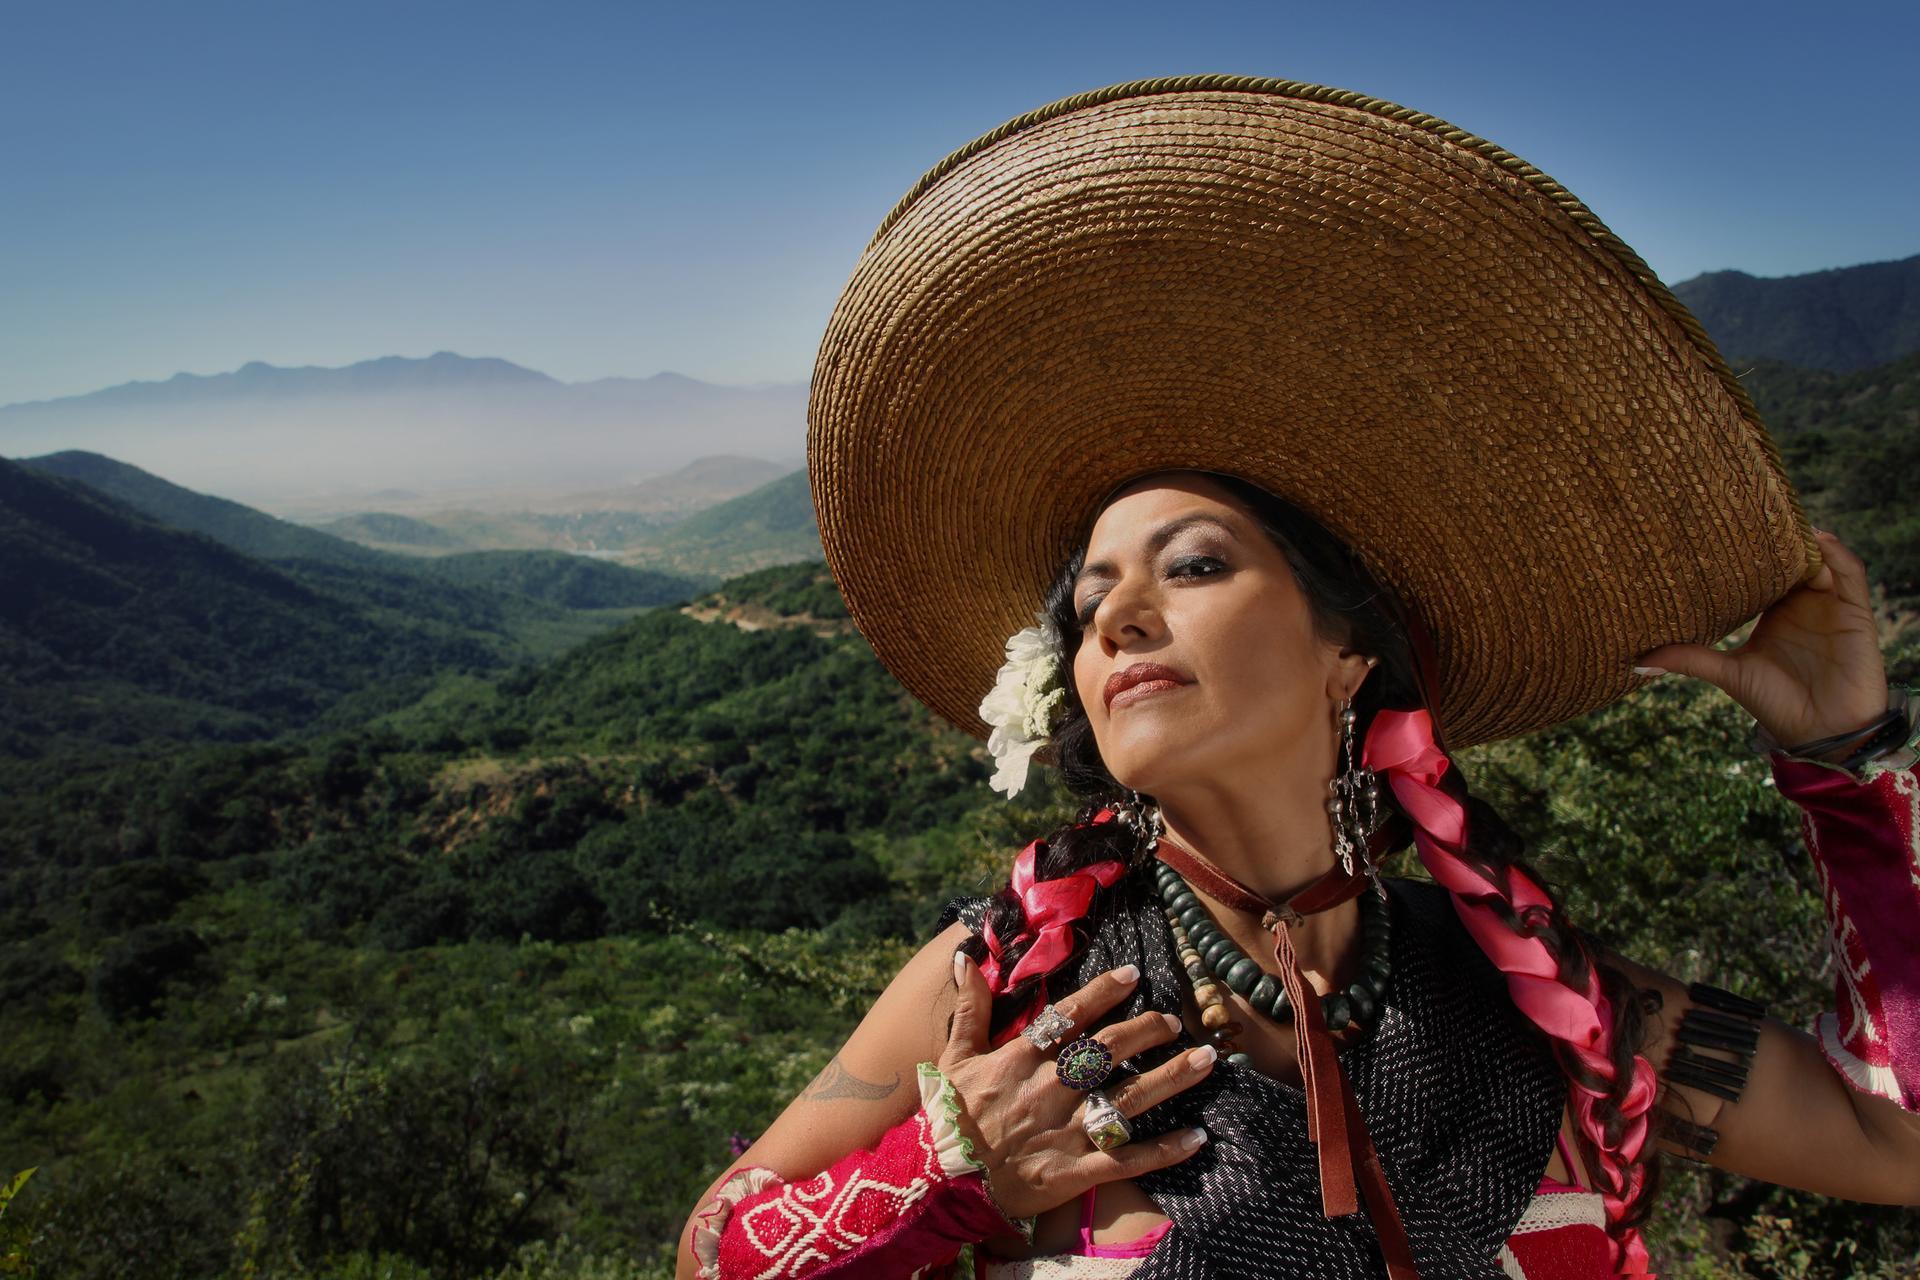 Mexican-American singer Lila Downs is voting in her first election